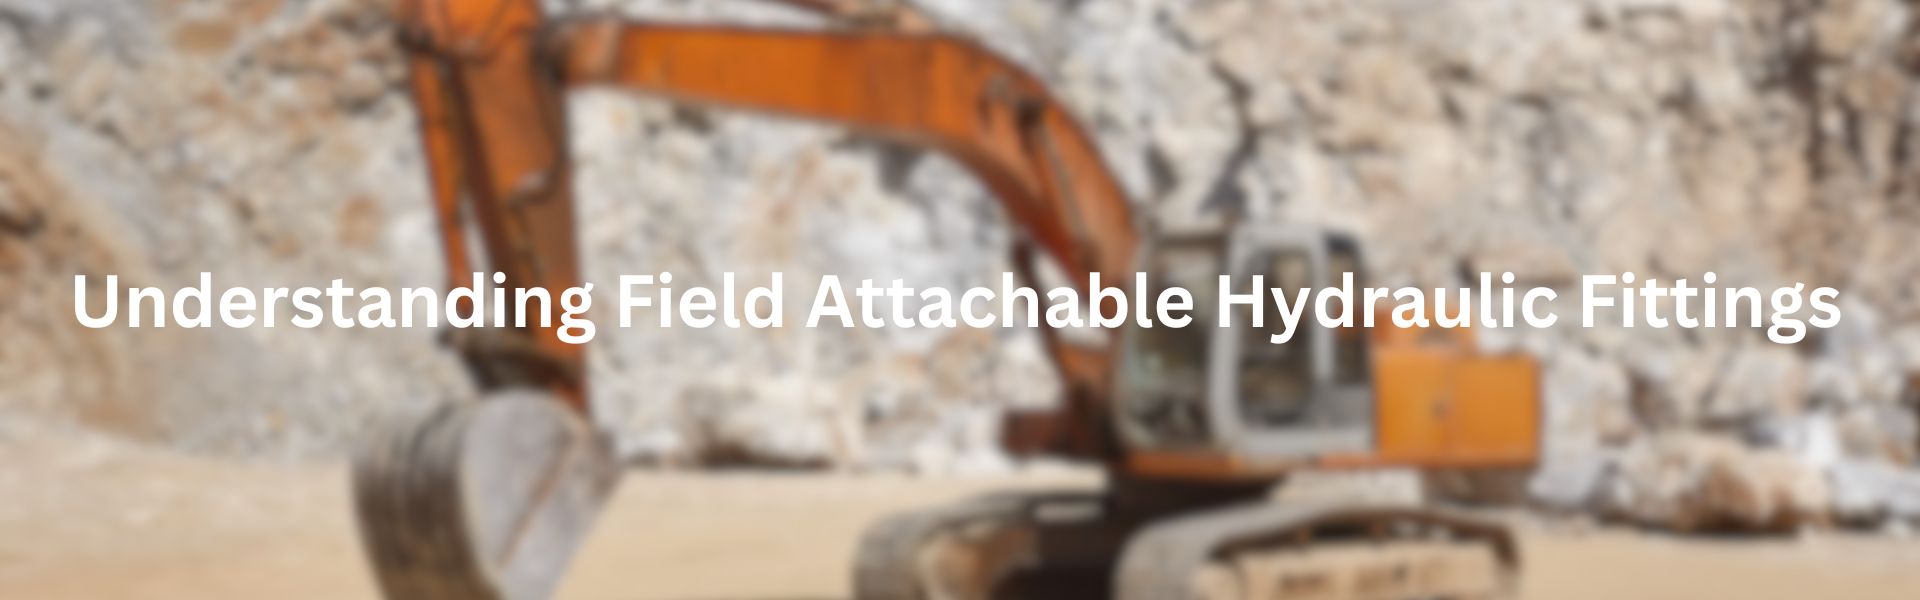 Understanding Field Attachable Hydraulic Fittings Topa